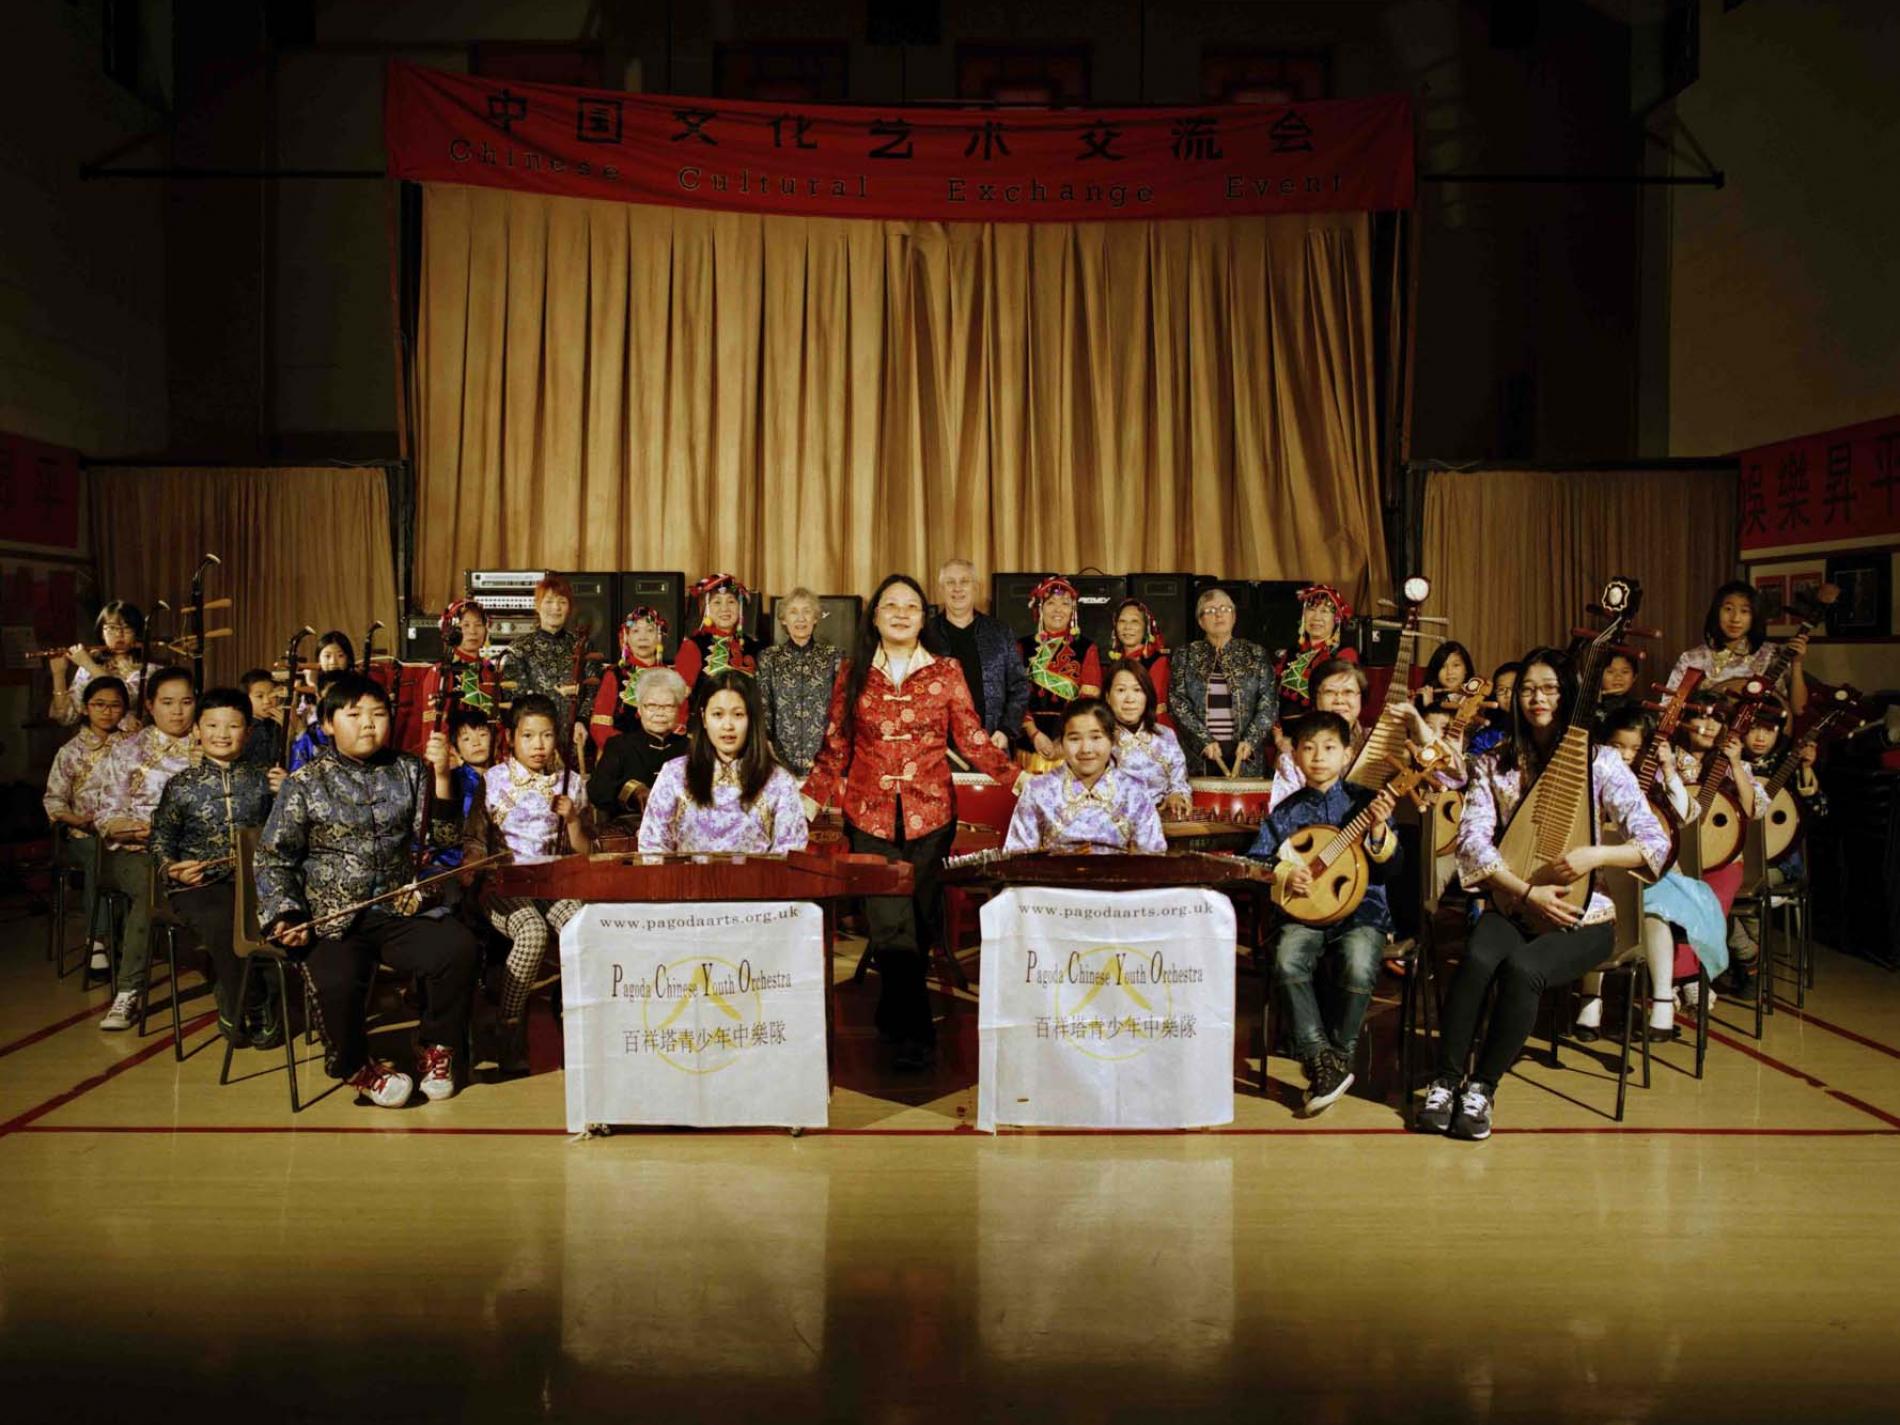 L8 Unseen: The Pagoda Chinese Youth Orchestra